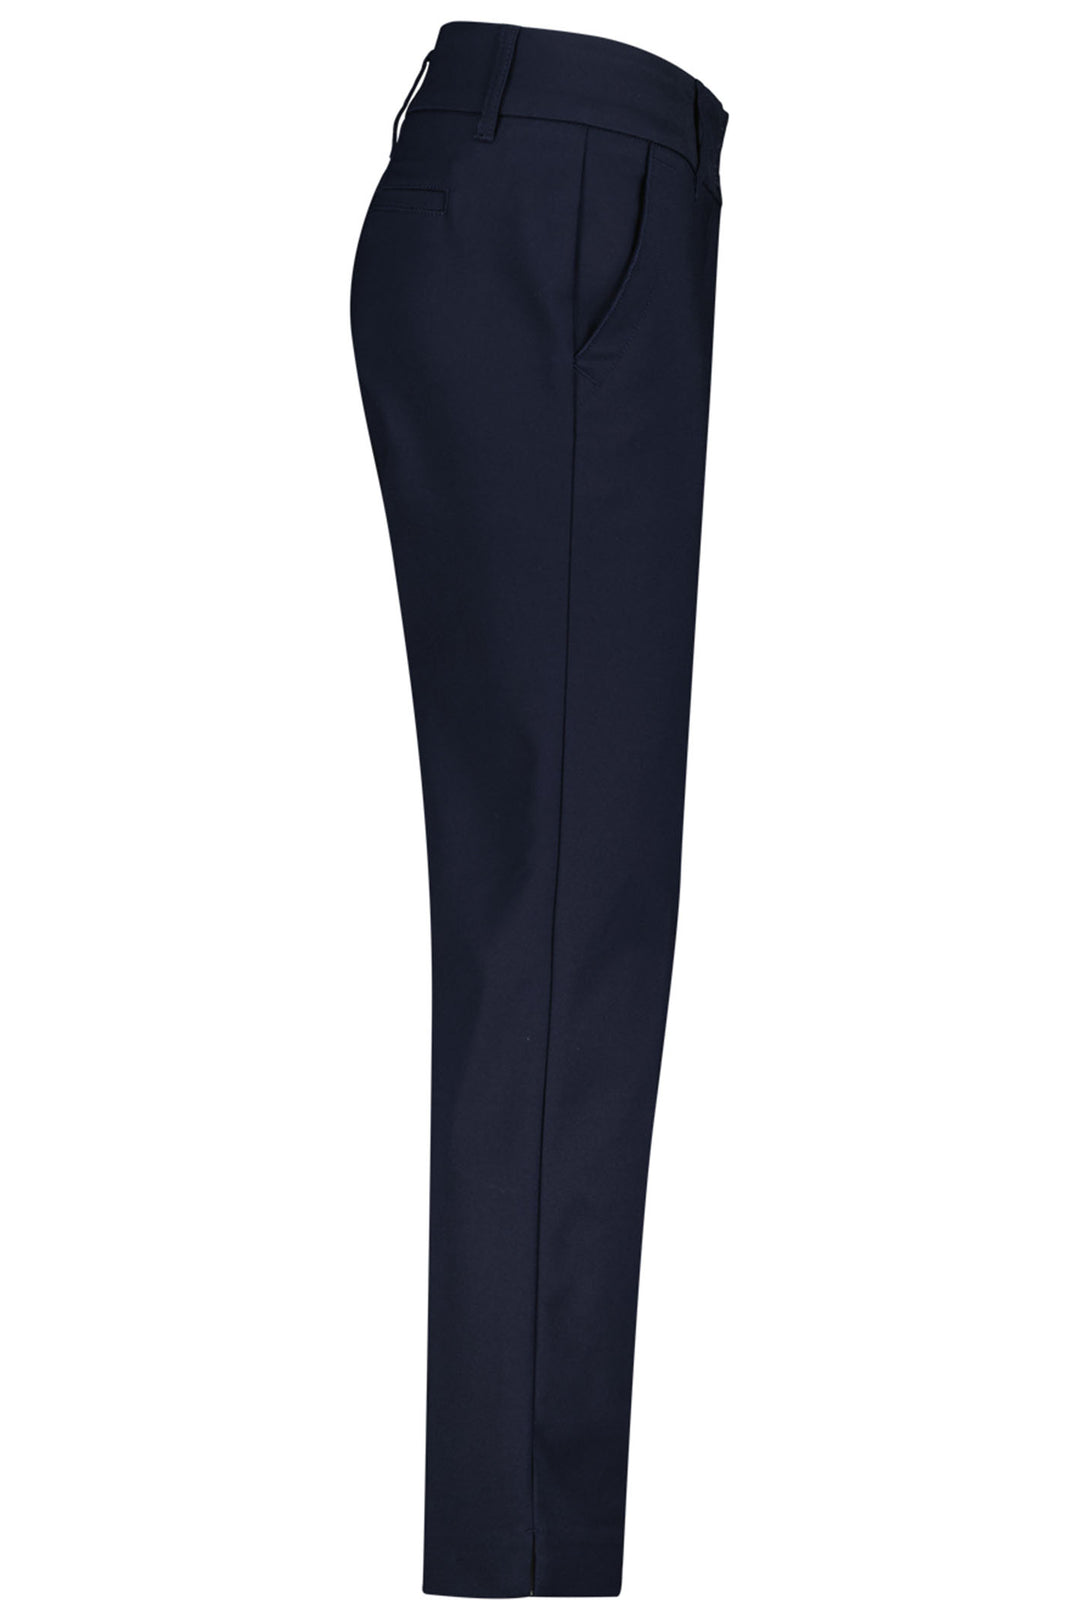 Red Button SRB4205 Diana Navy Smart Trousers 72cm - Olivia Grace Fashion